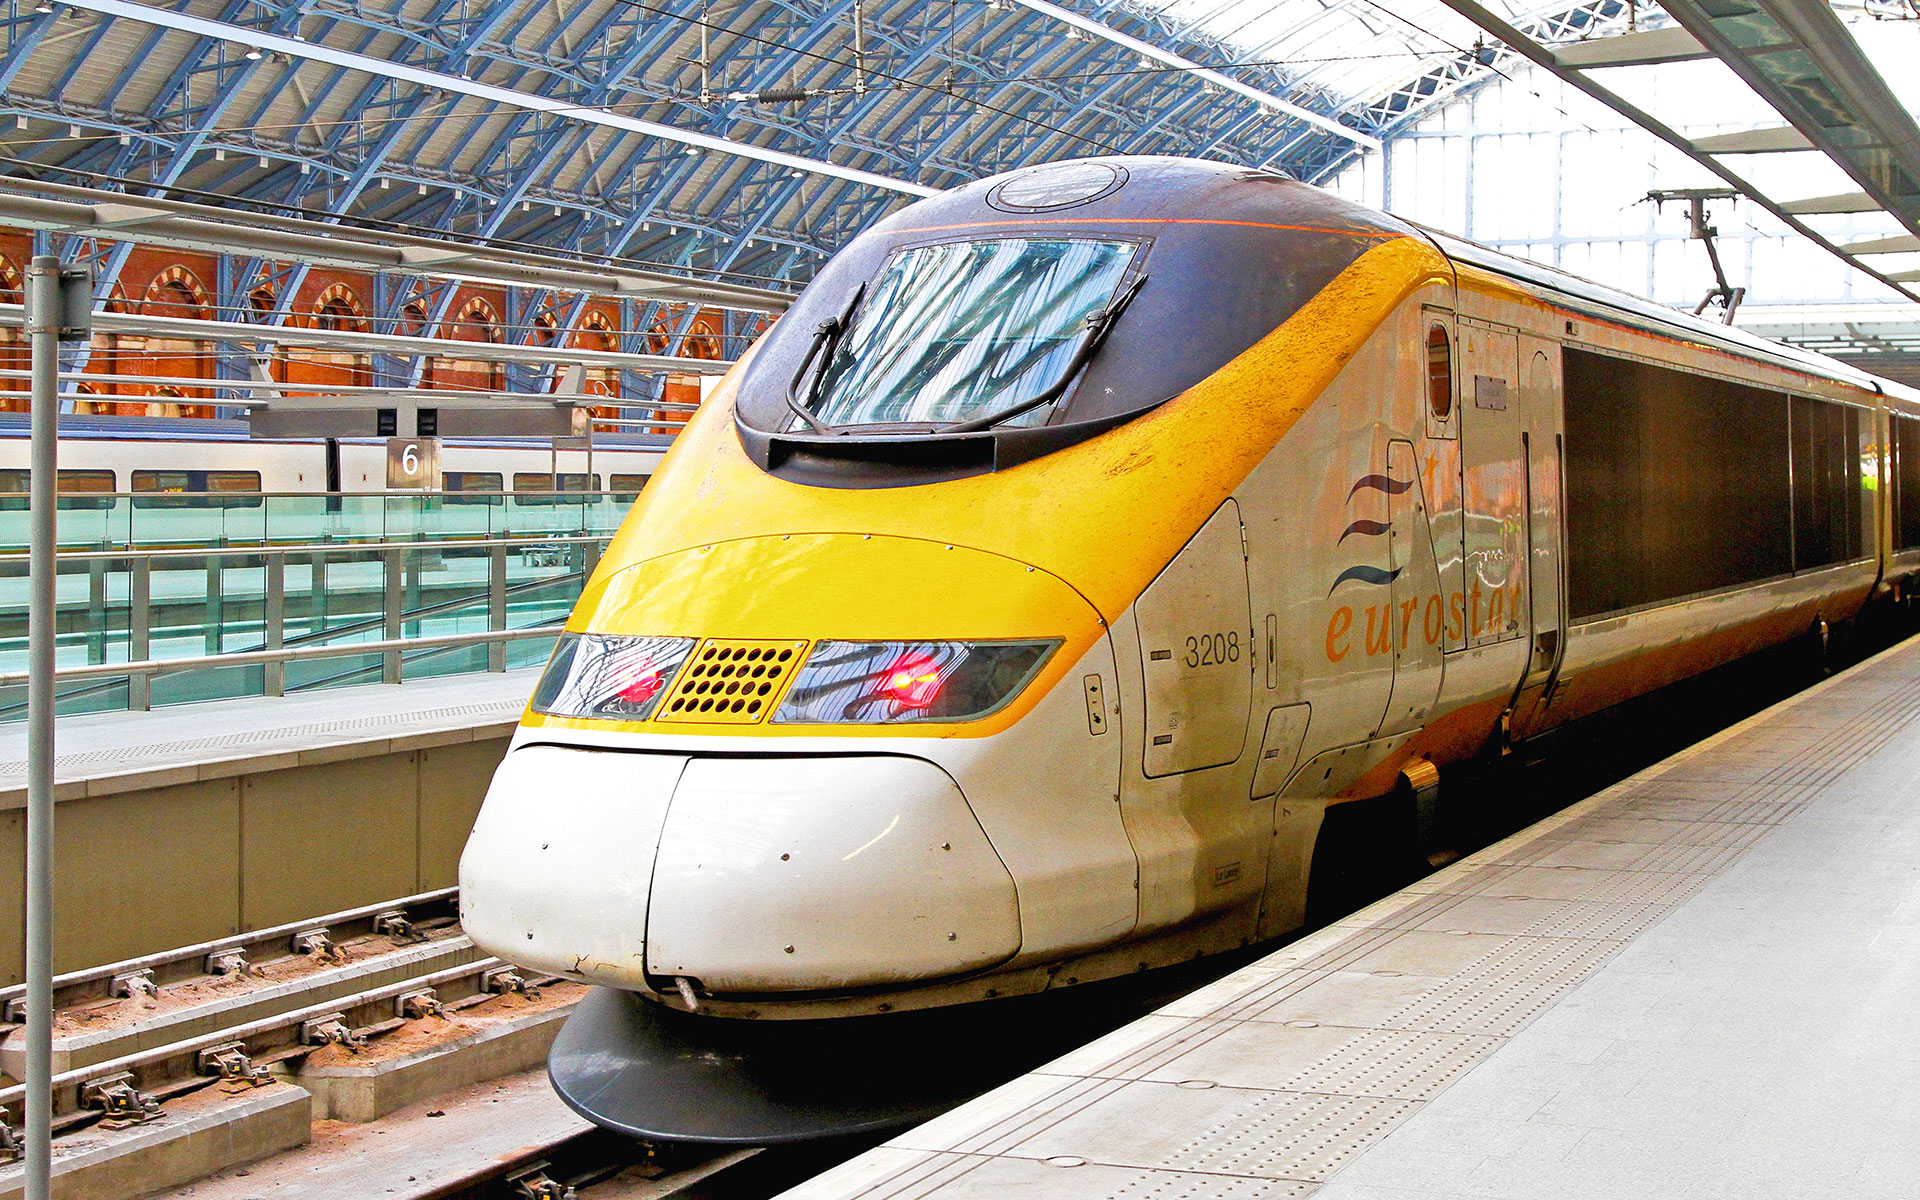 Eurostar has announced a new service from London to Lyon and Marseille starting in 2015 which will create new travel opportunities for travellers bound for the Mediterranean (photo © Baloncici).